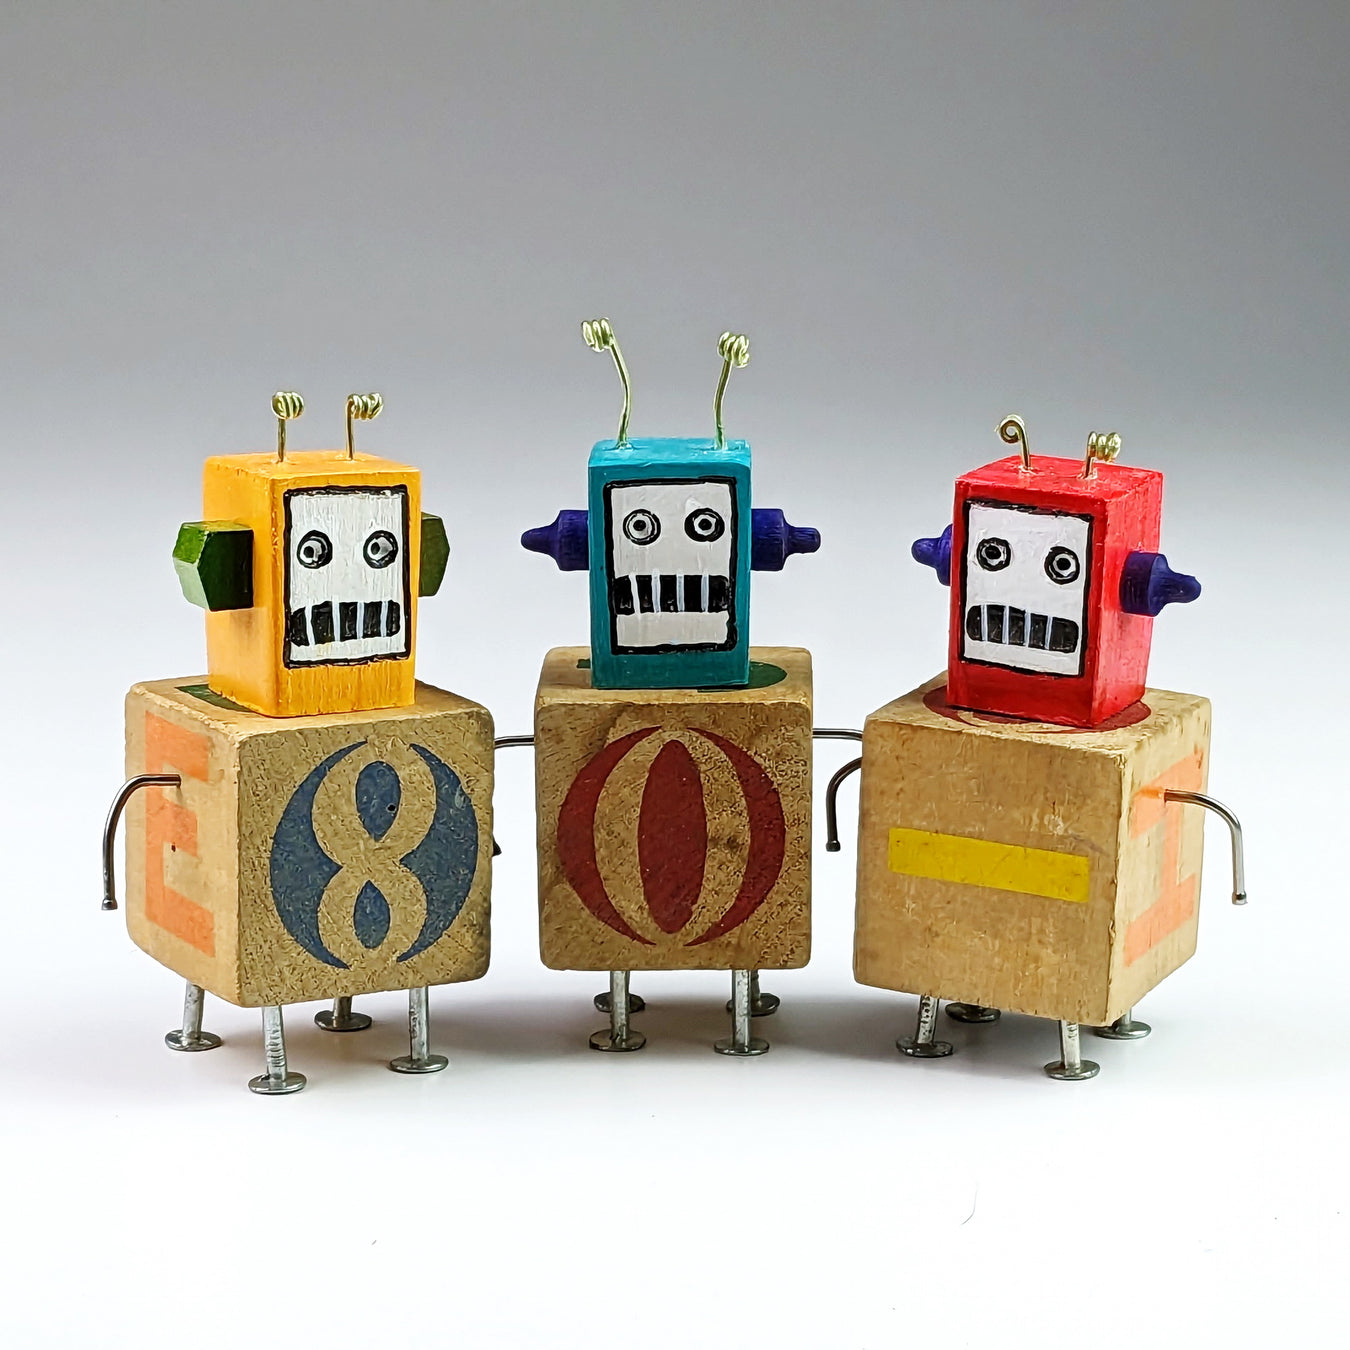 3 figures created with vintage wooden blocks